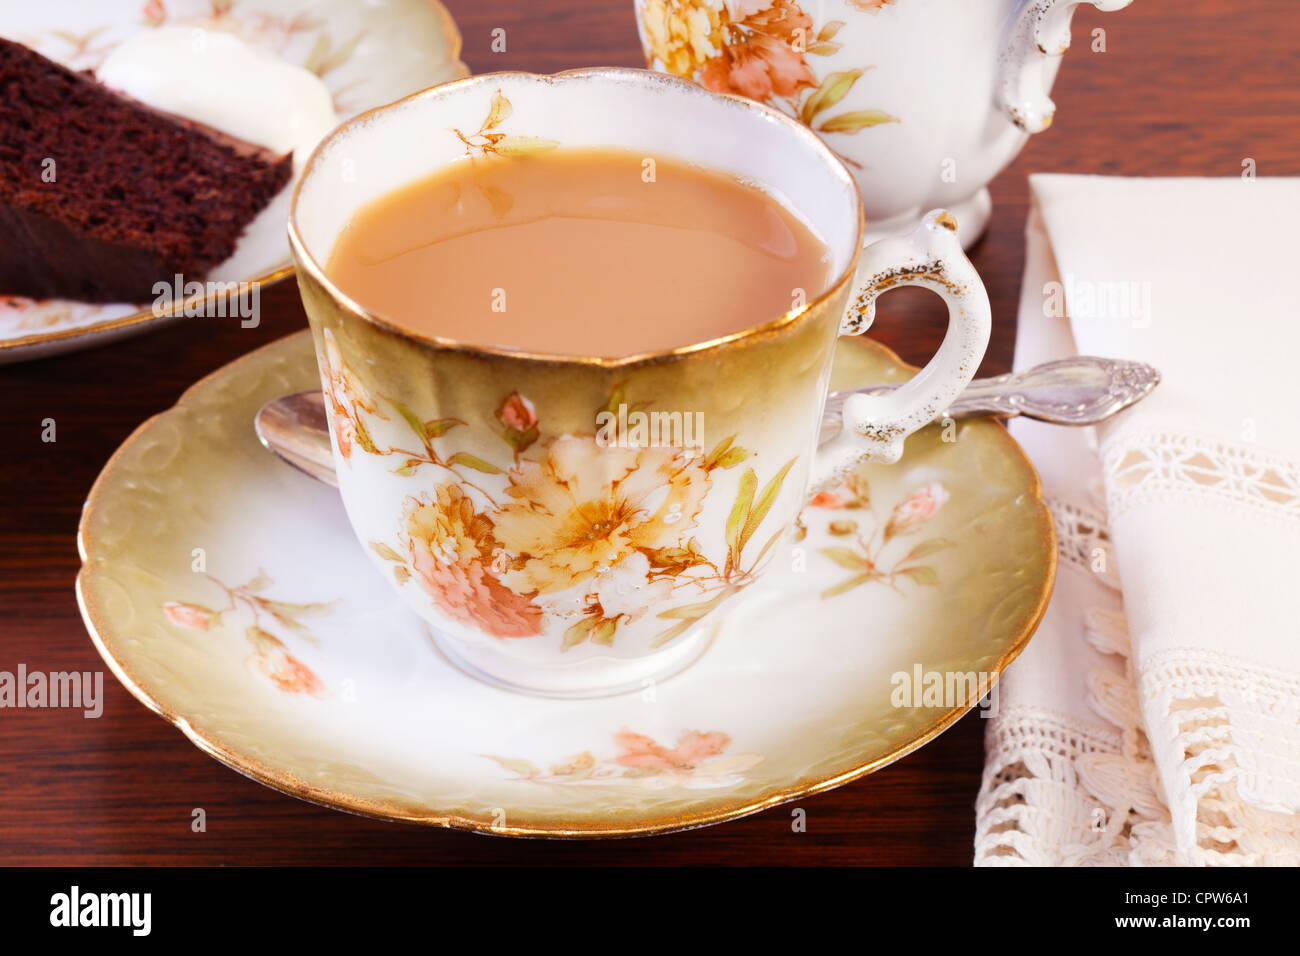 Afternoon tea set out on a dark oak table, with a cup of tea and chocolate cake, delicious nostalgia! Stock Photo